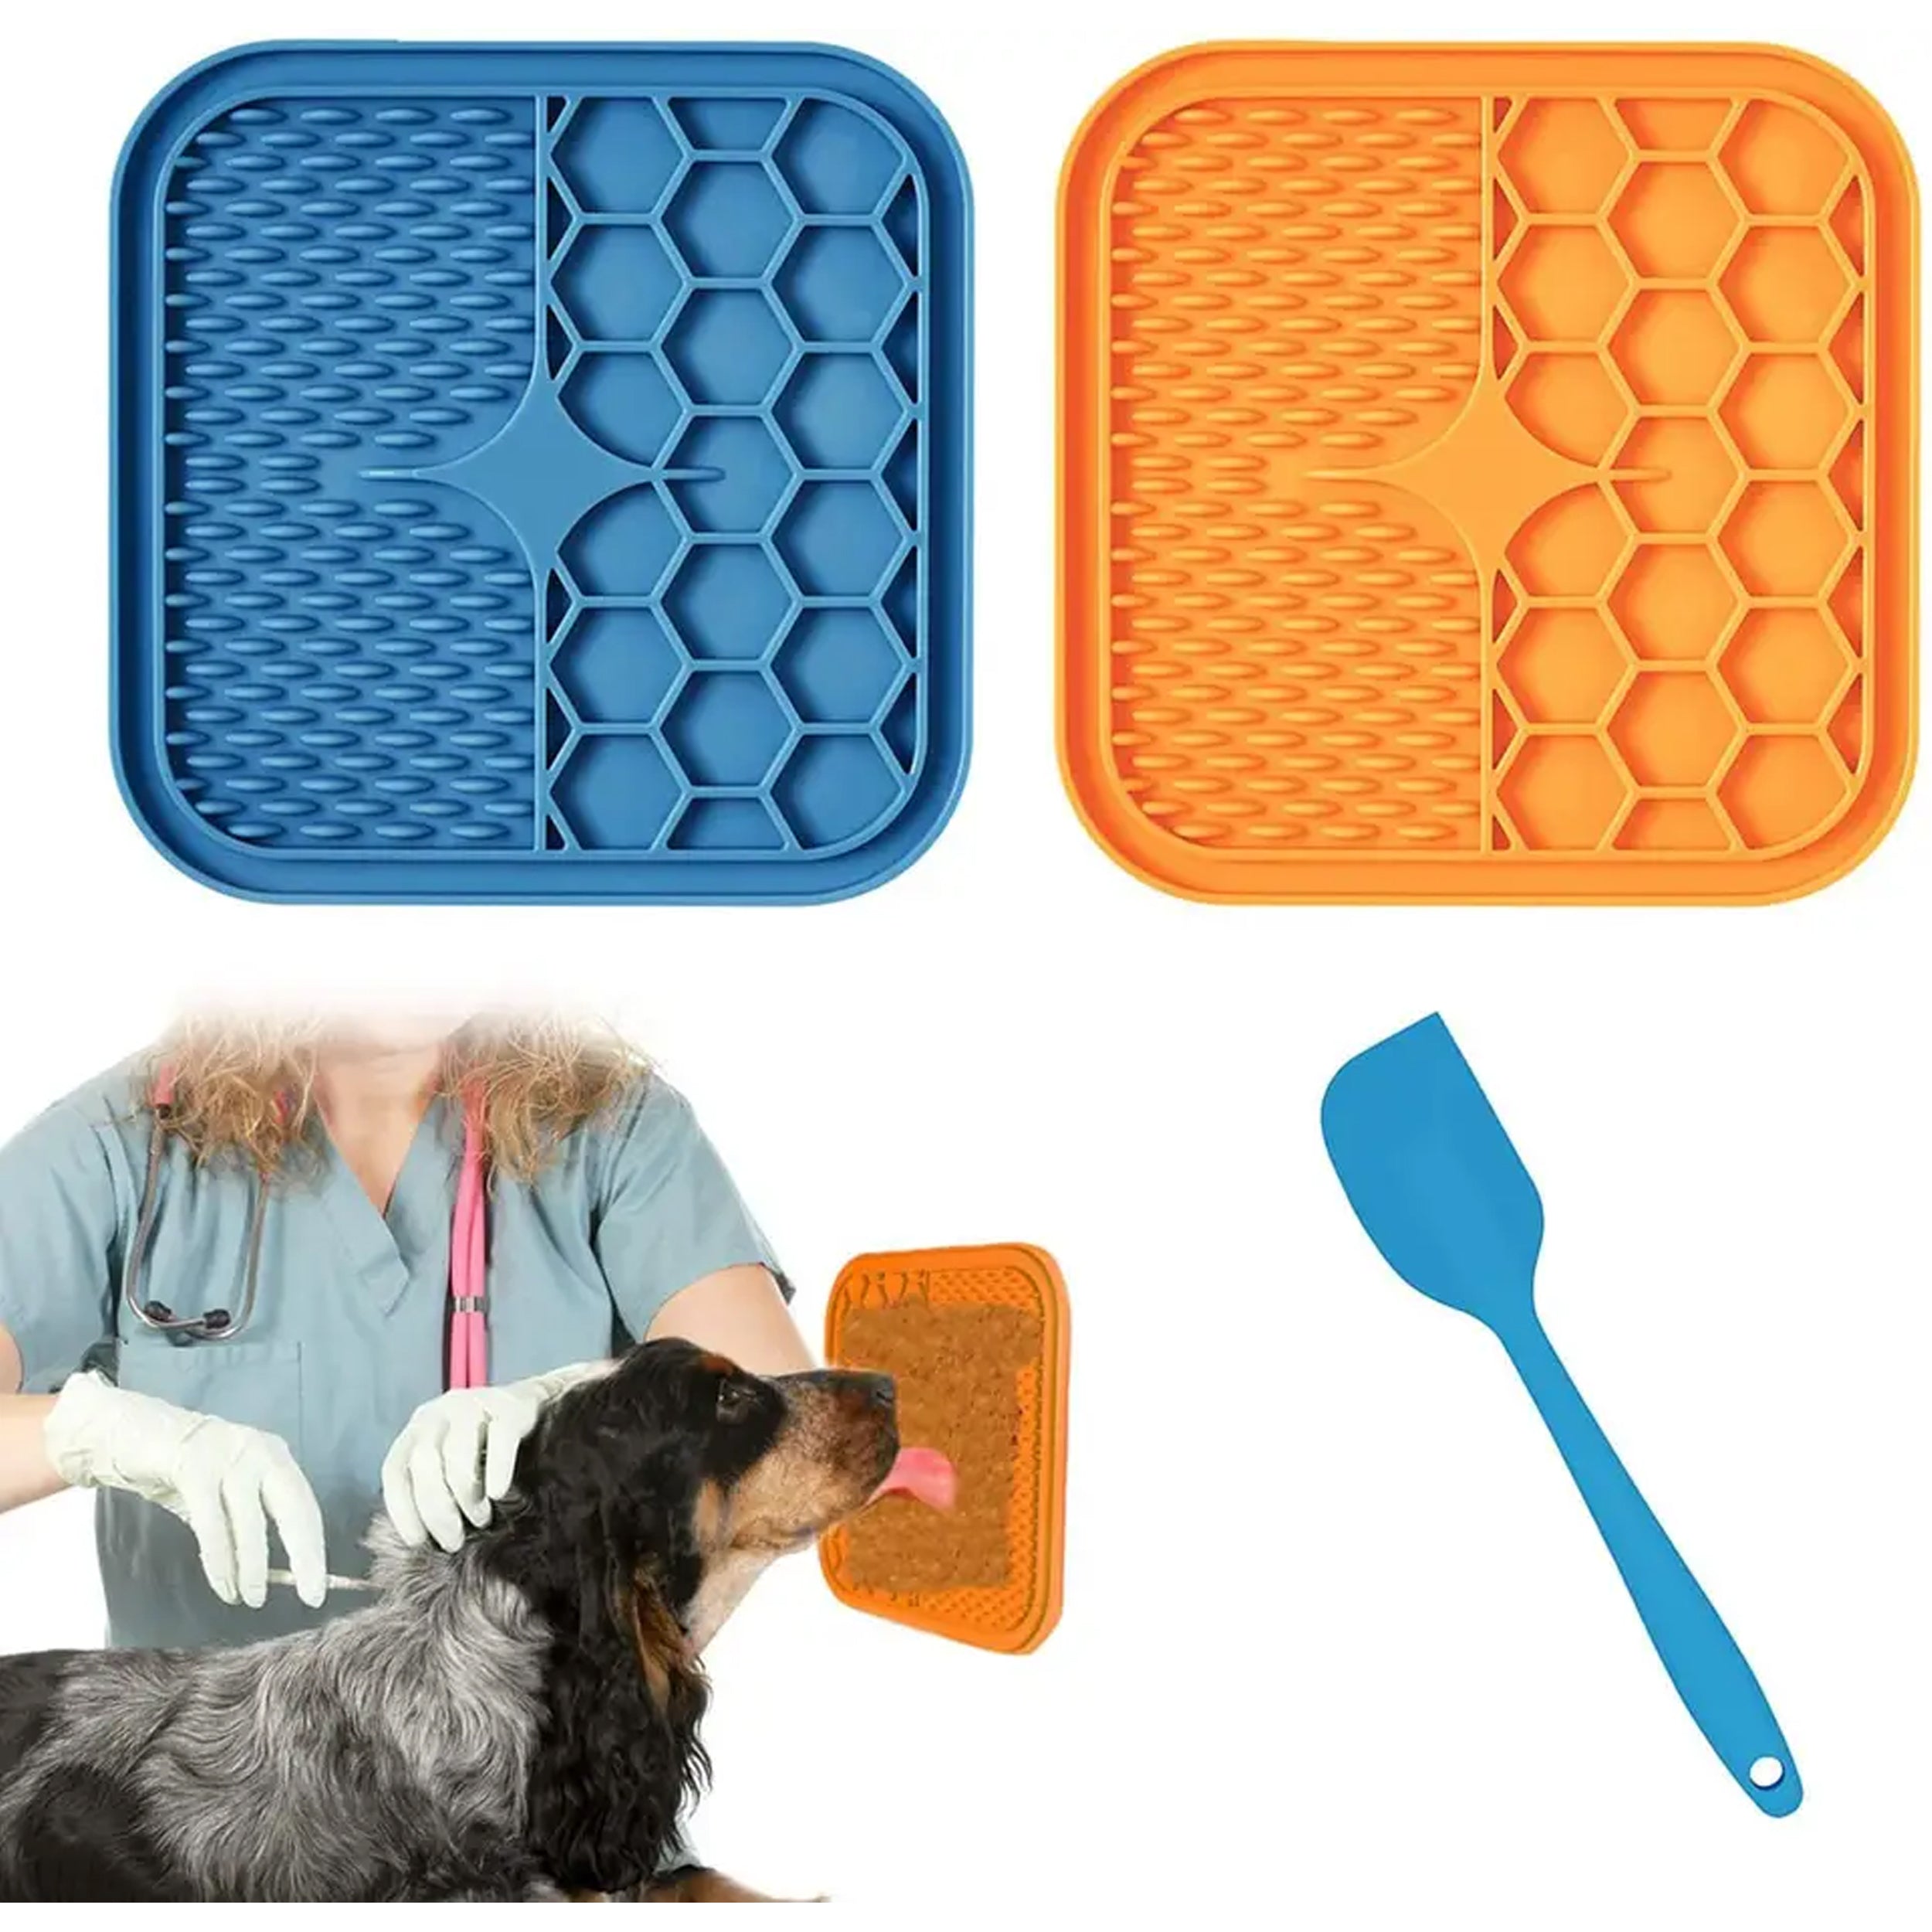 Silicone Lick Pad Slower Feeder Pad Cats Dog Licky Mat Fedding